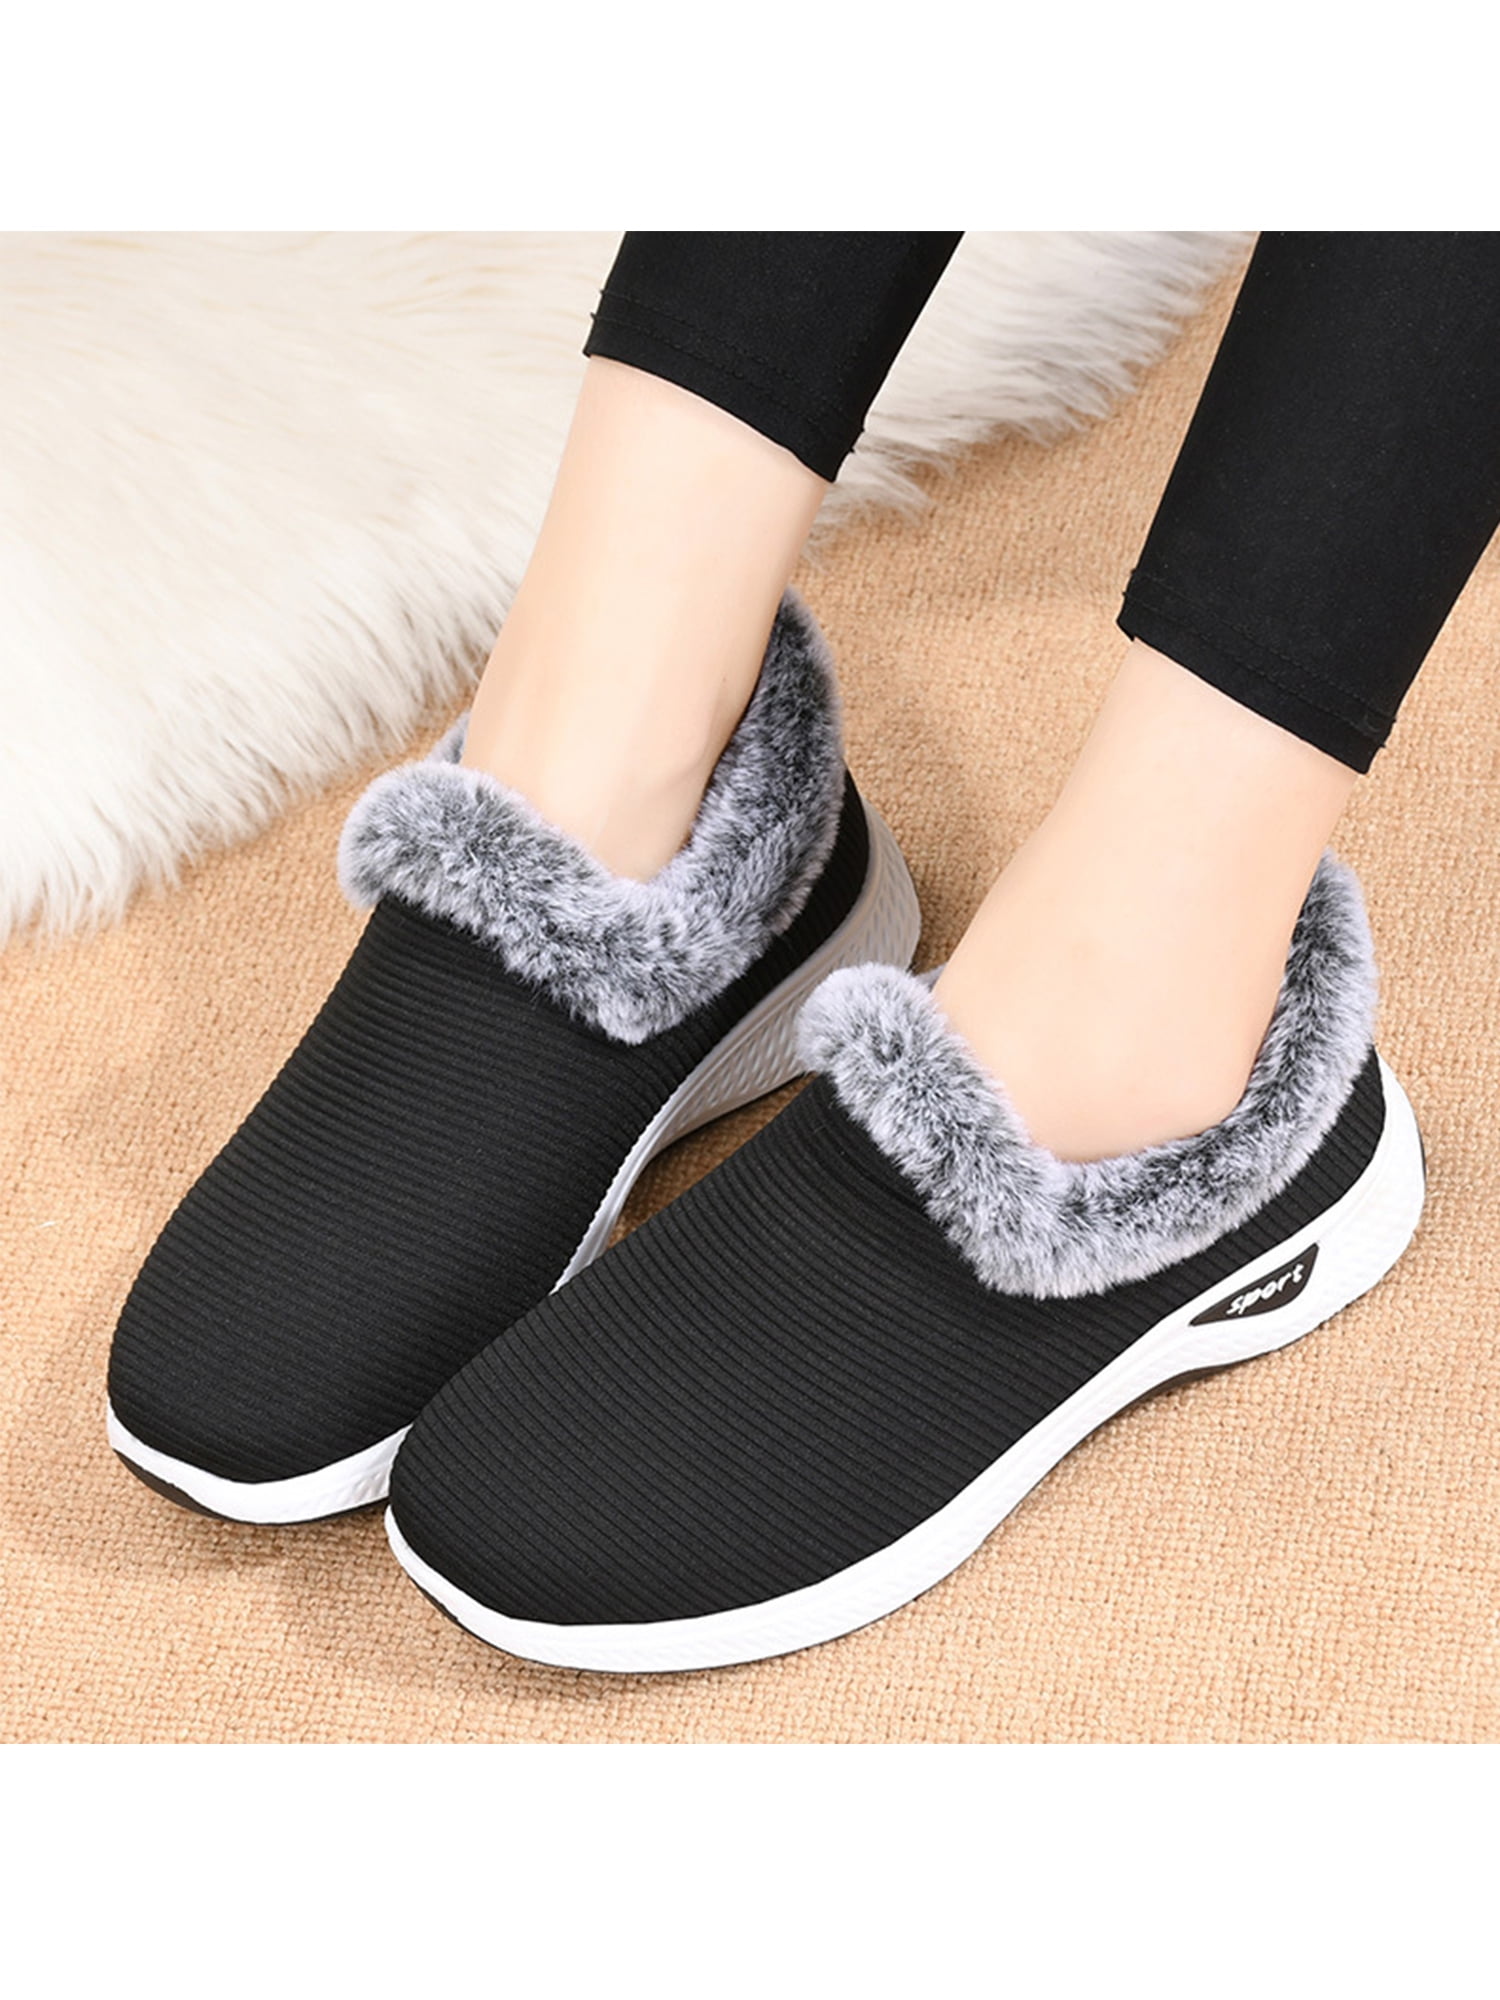 Women's Hidden Wedge Sneakers Athletic Slip on Loafers Suede Shoes Comfy 5-8.5